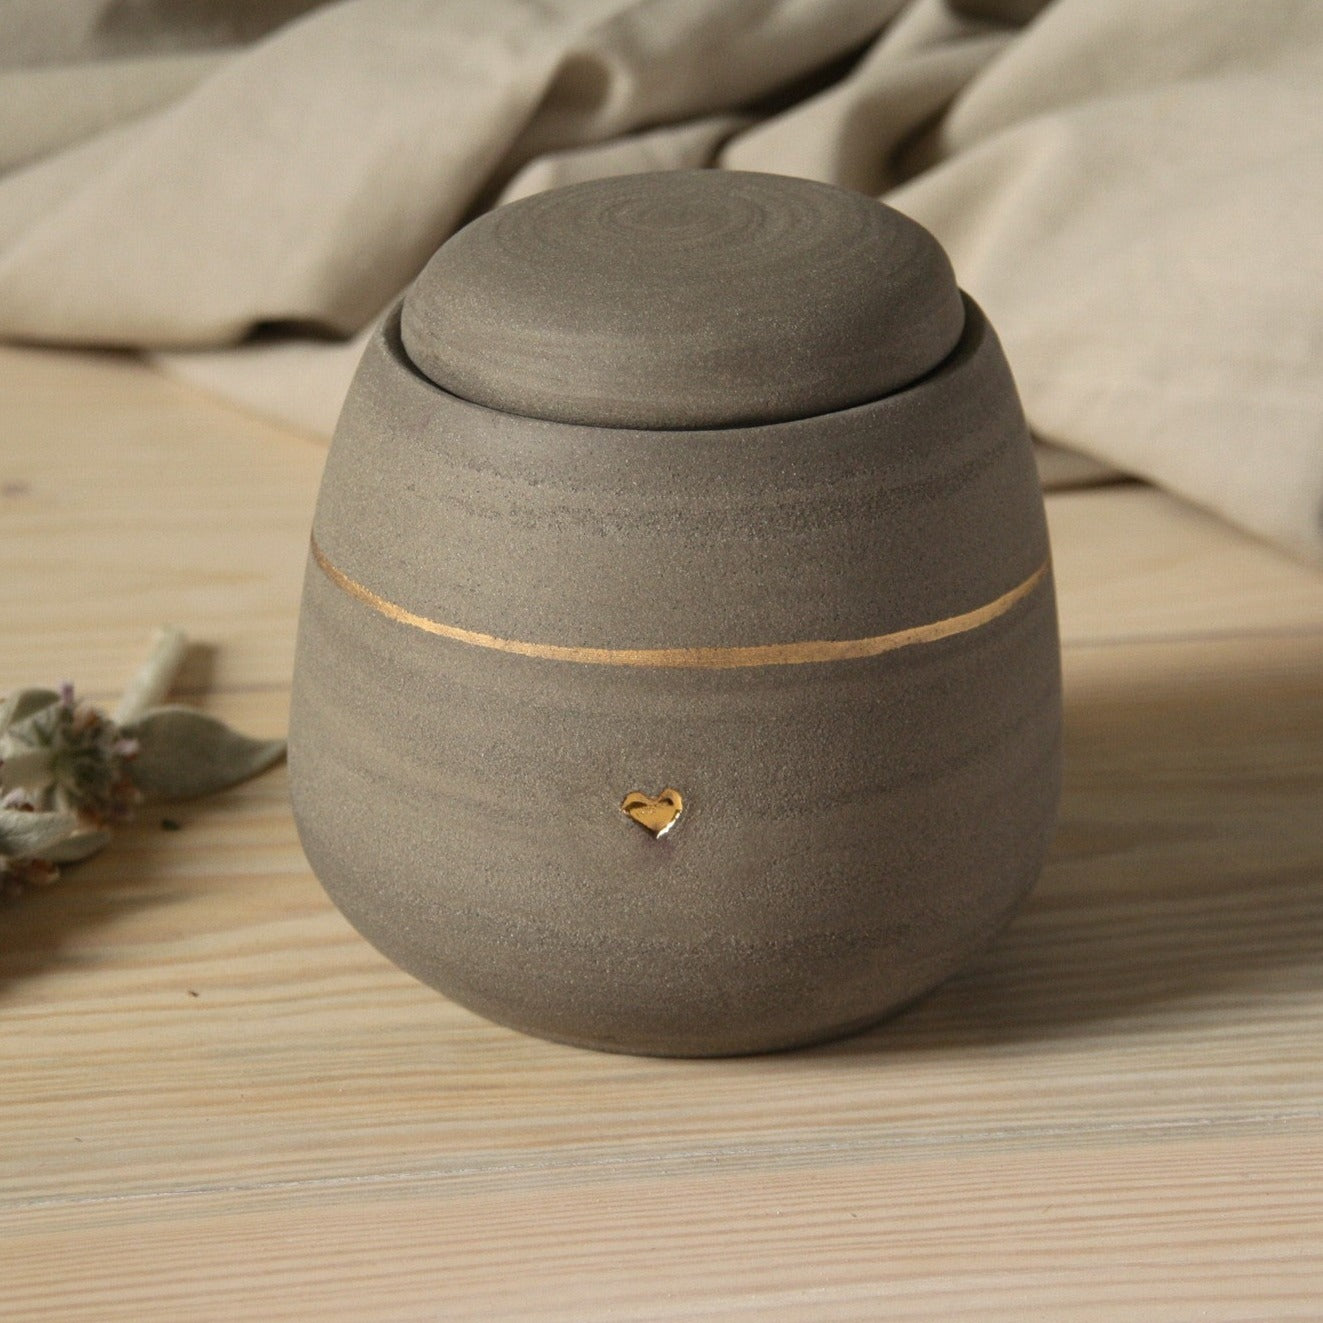 Handmade dog cremation urn - gray with gold paw stamp - custom name - honoring your loyal friend.